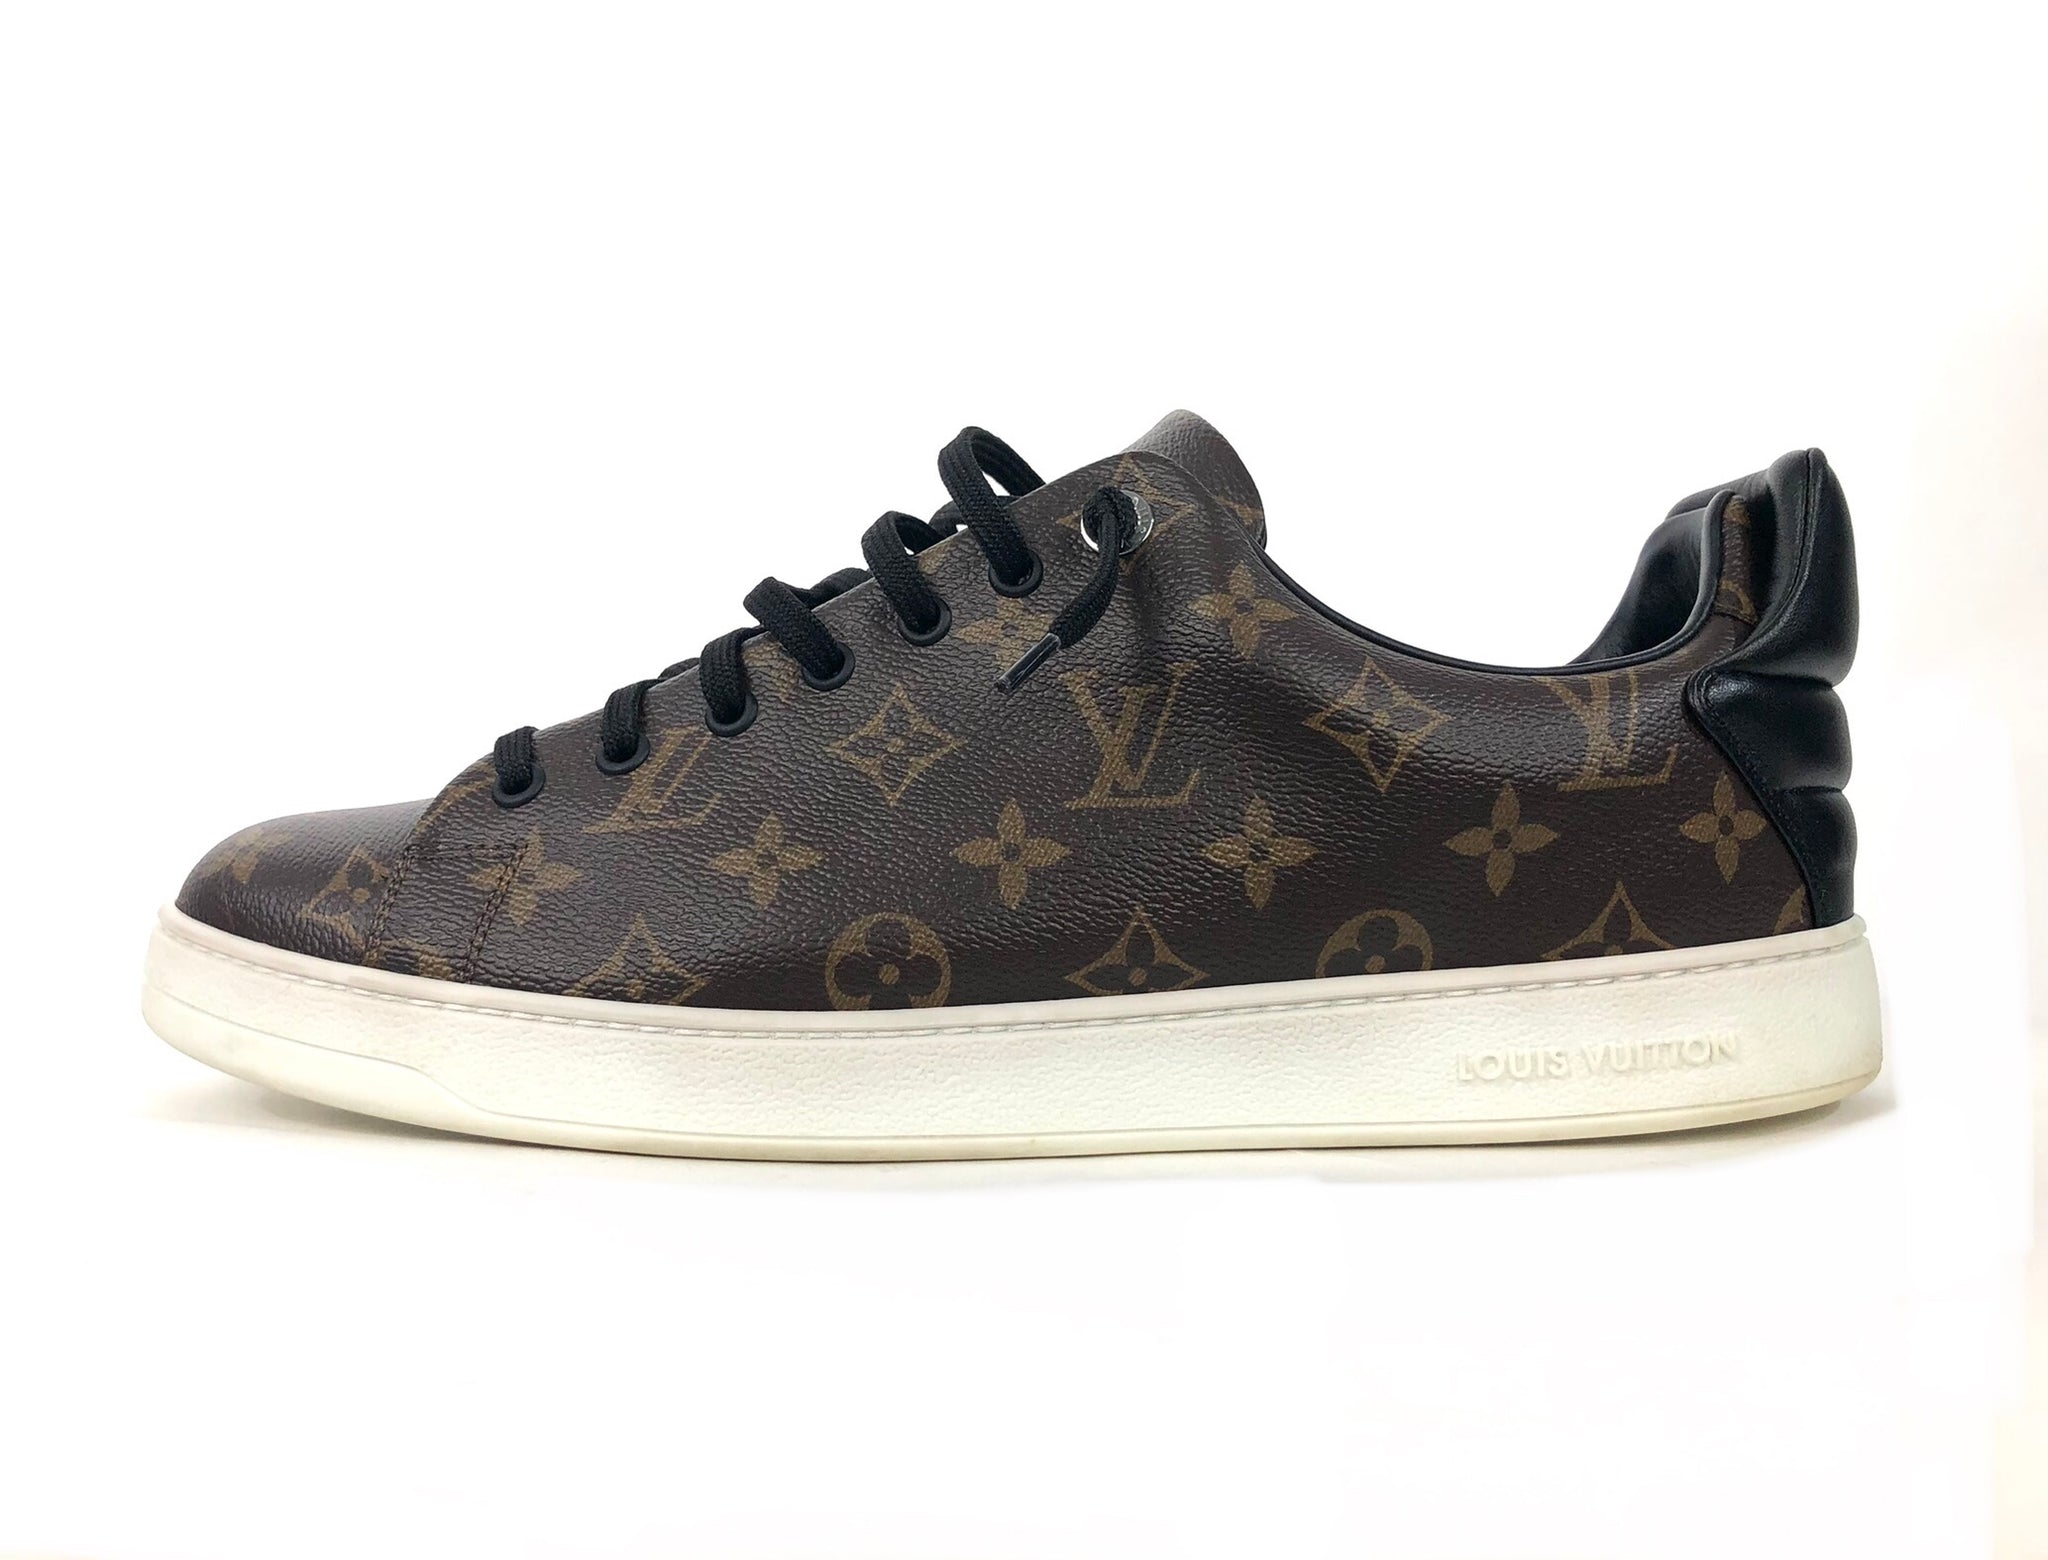 Louis Vuitton Men's Black and Brown Monogram High-Top Sneakers - US Size 8.5